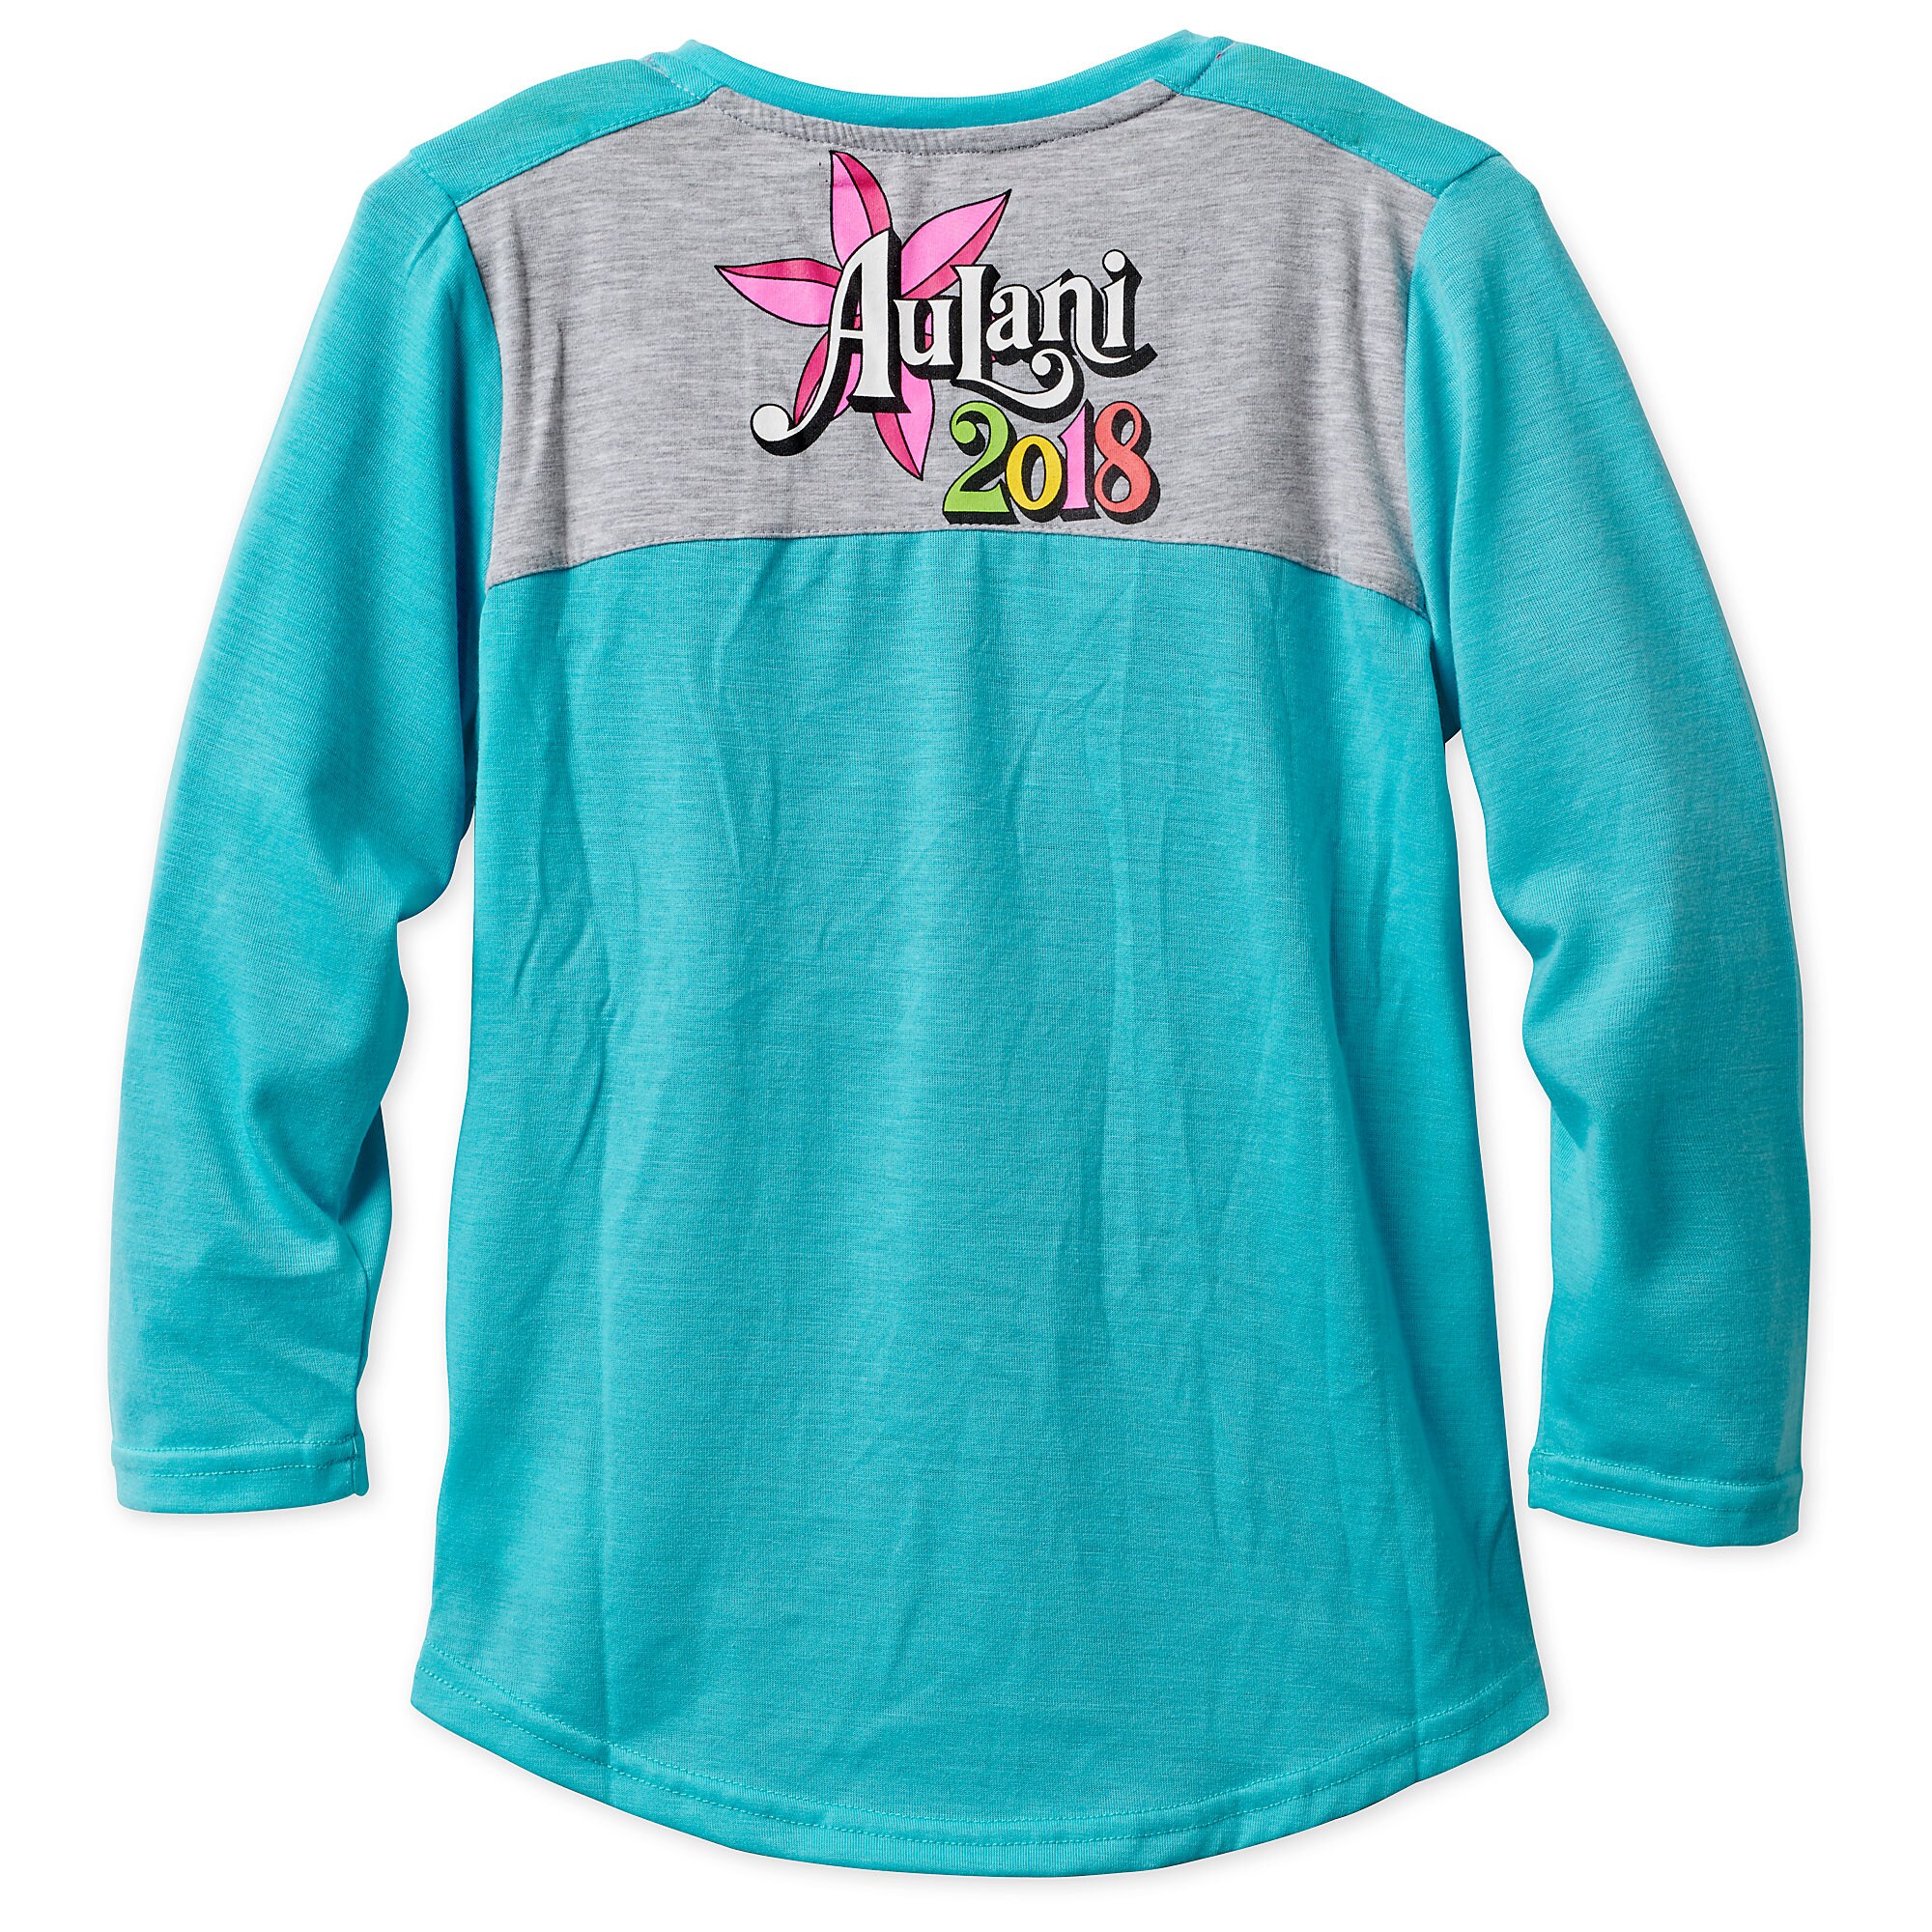 Minnie Mouse Long Sleeve T-Shirt for Girls - Aulani, A Disney Resort & Spa